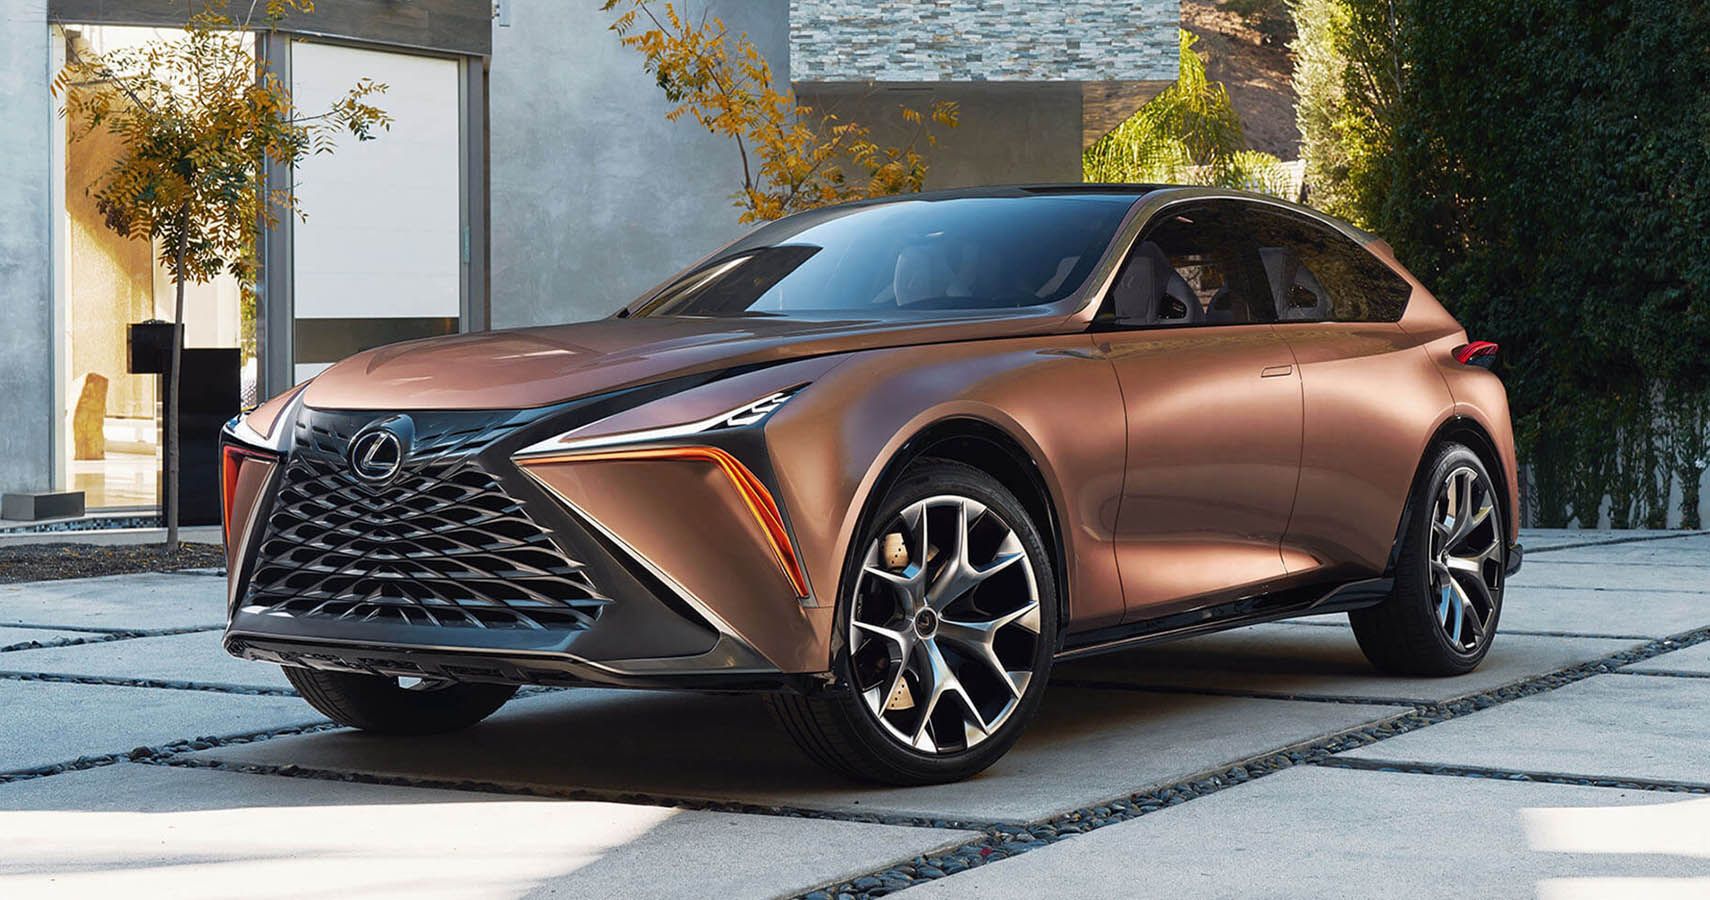 2022 Lexus LQ Here's What We Expect